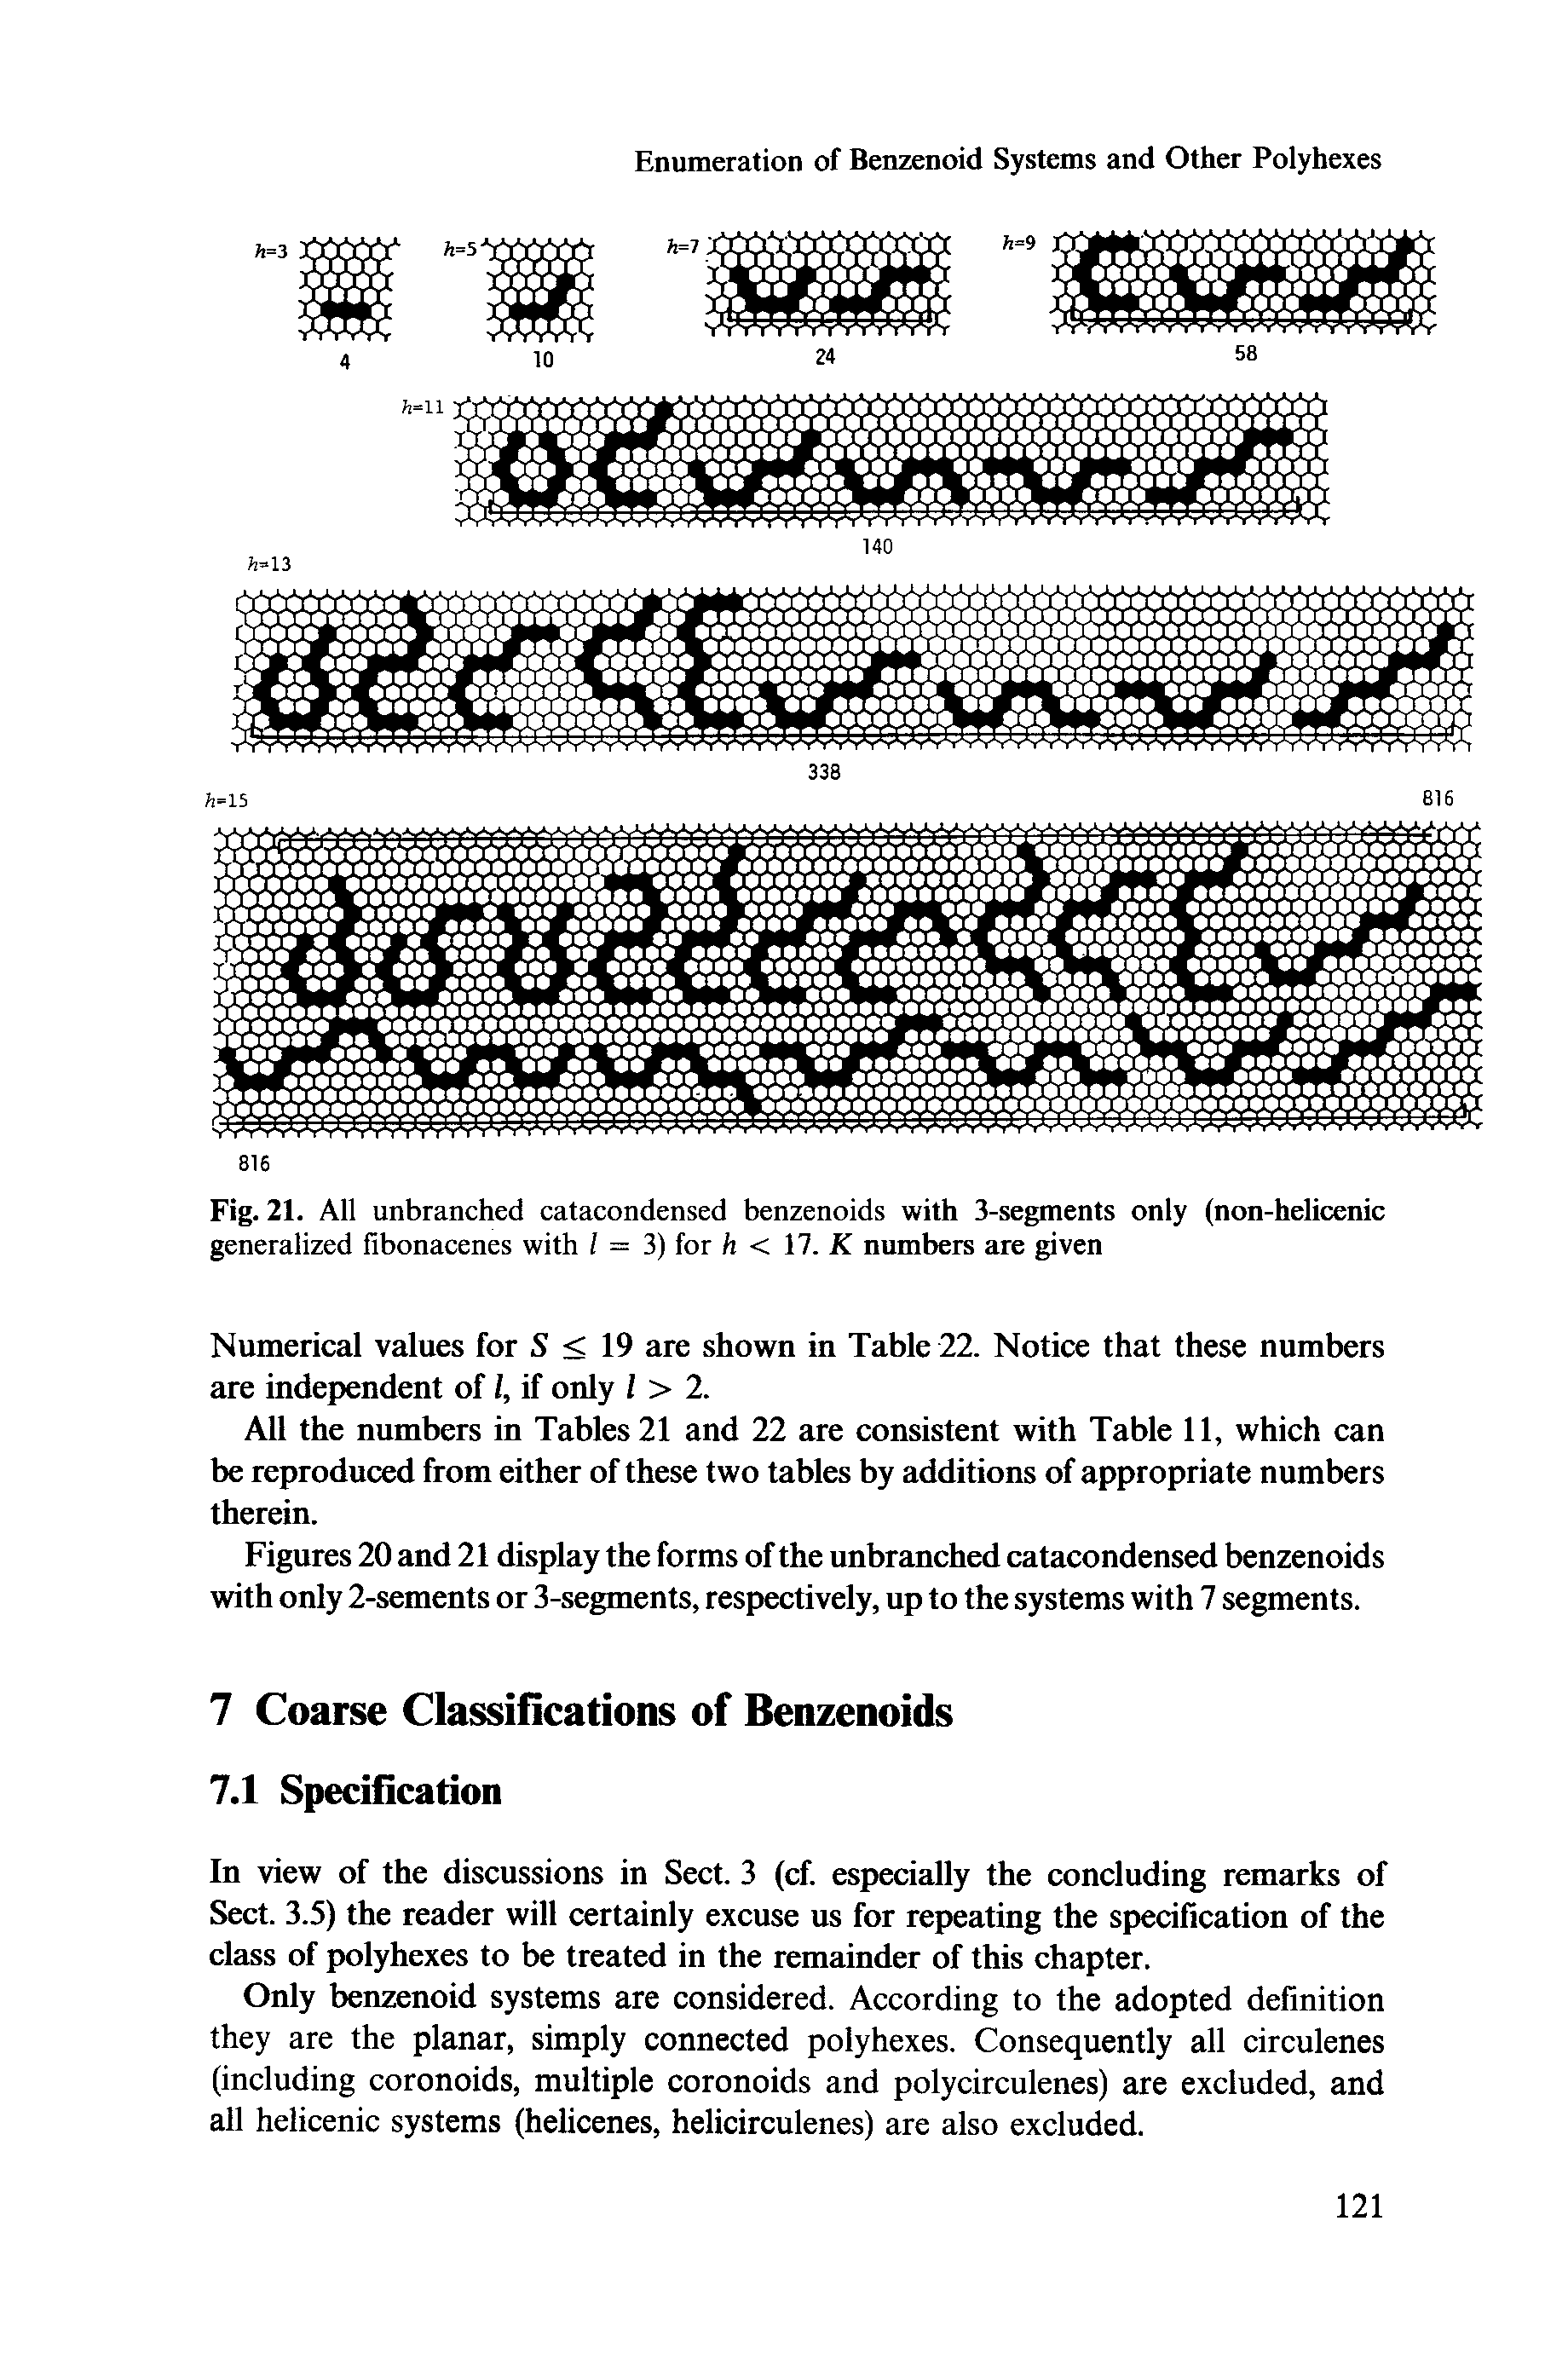 Figures 20 and 21 display the forms of the unbranched catacondensed benzenoids with only 2-sements or 3-segments, respectively, up to the systems with 7 segments.